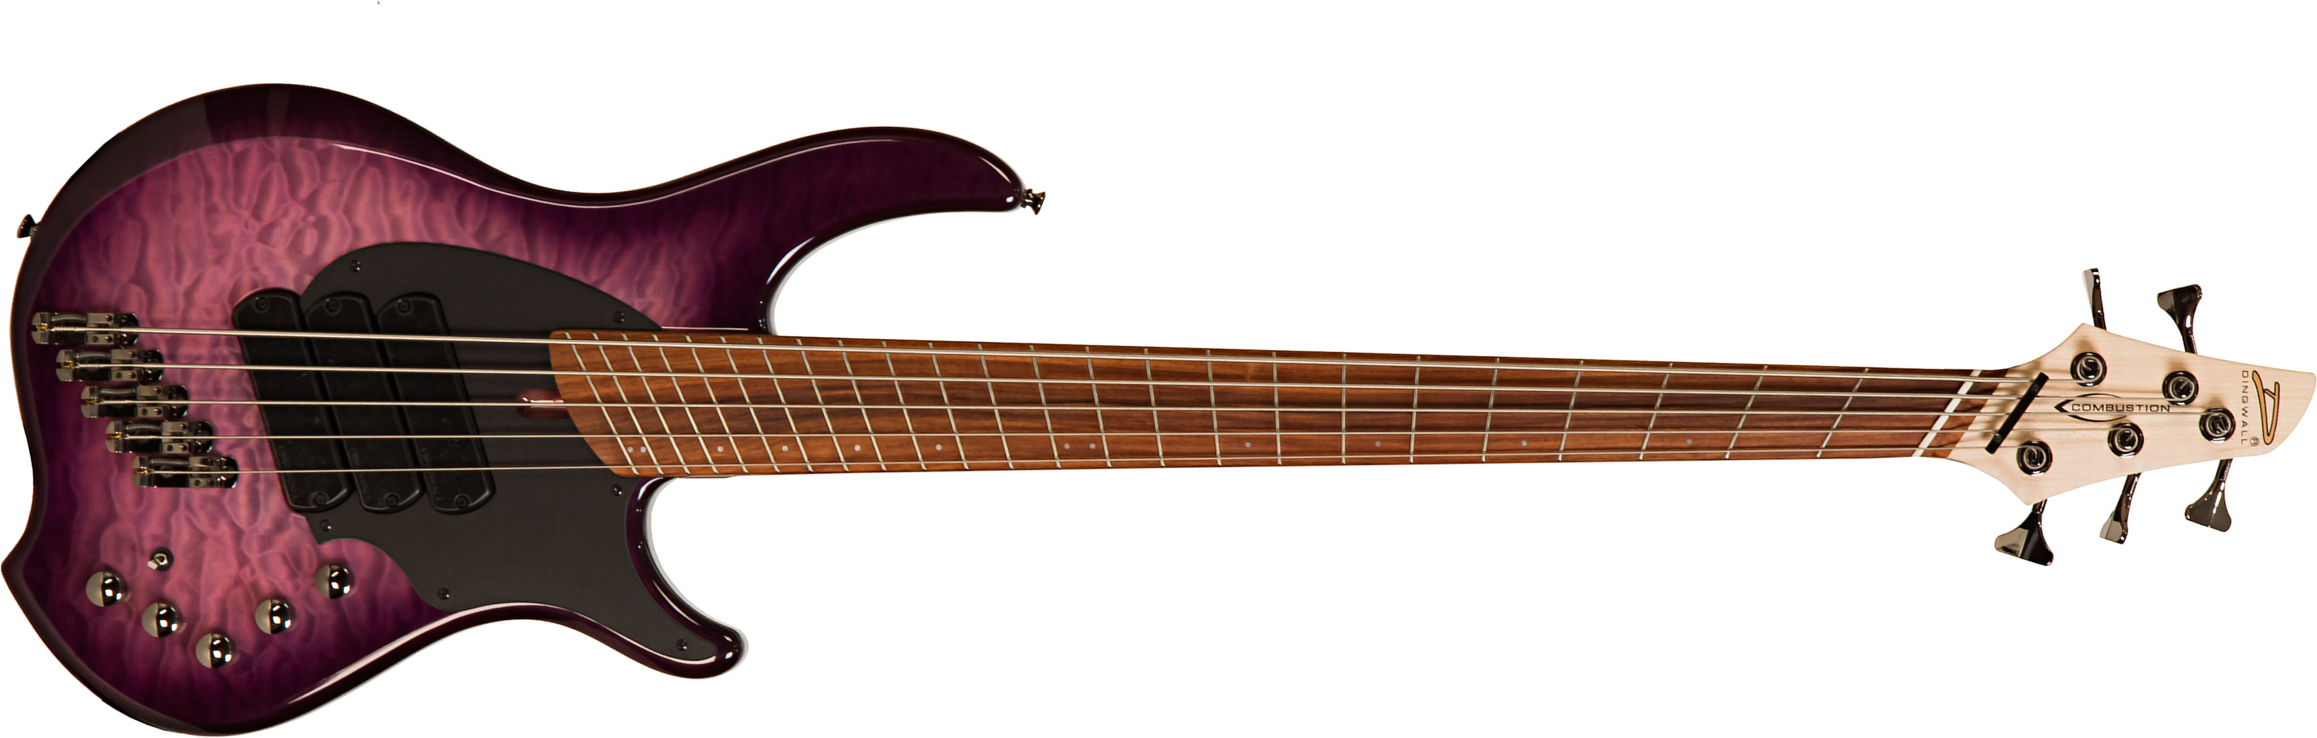 Dingwall Combustion Cb3 5c 3pu Active Mn - Ultra Violet Gloss - Solid body electric bass - Main picture